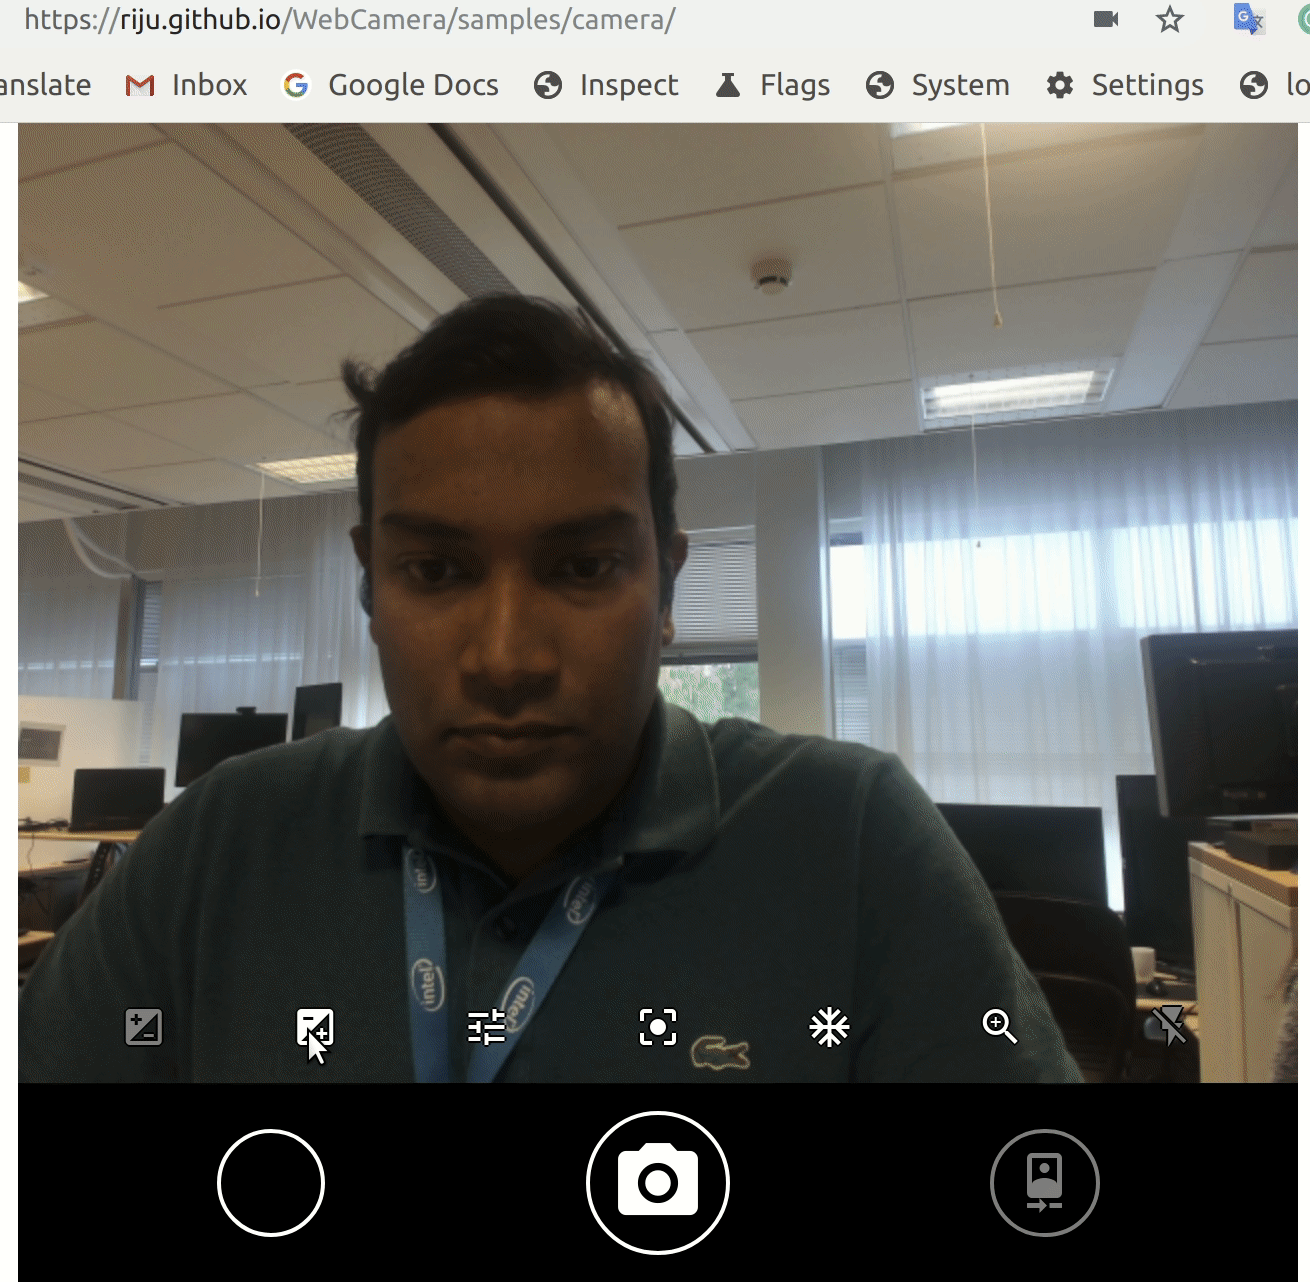 proCamera.gif is not yet loaded